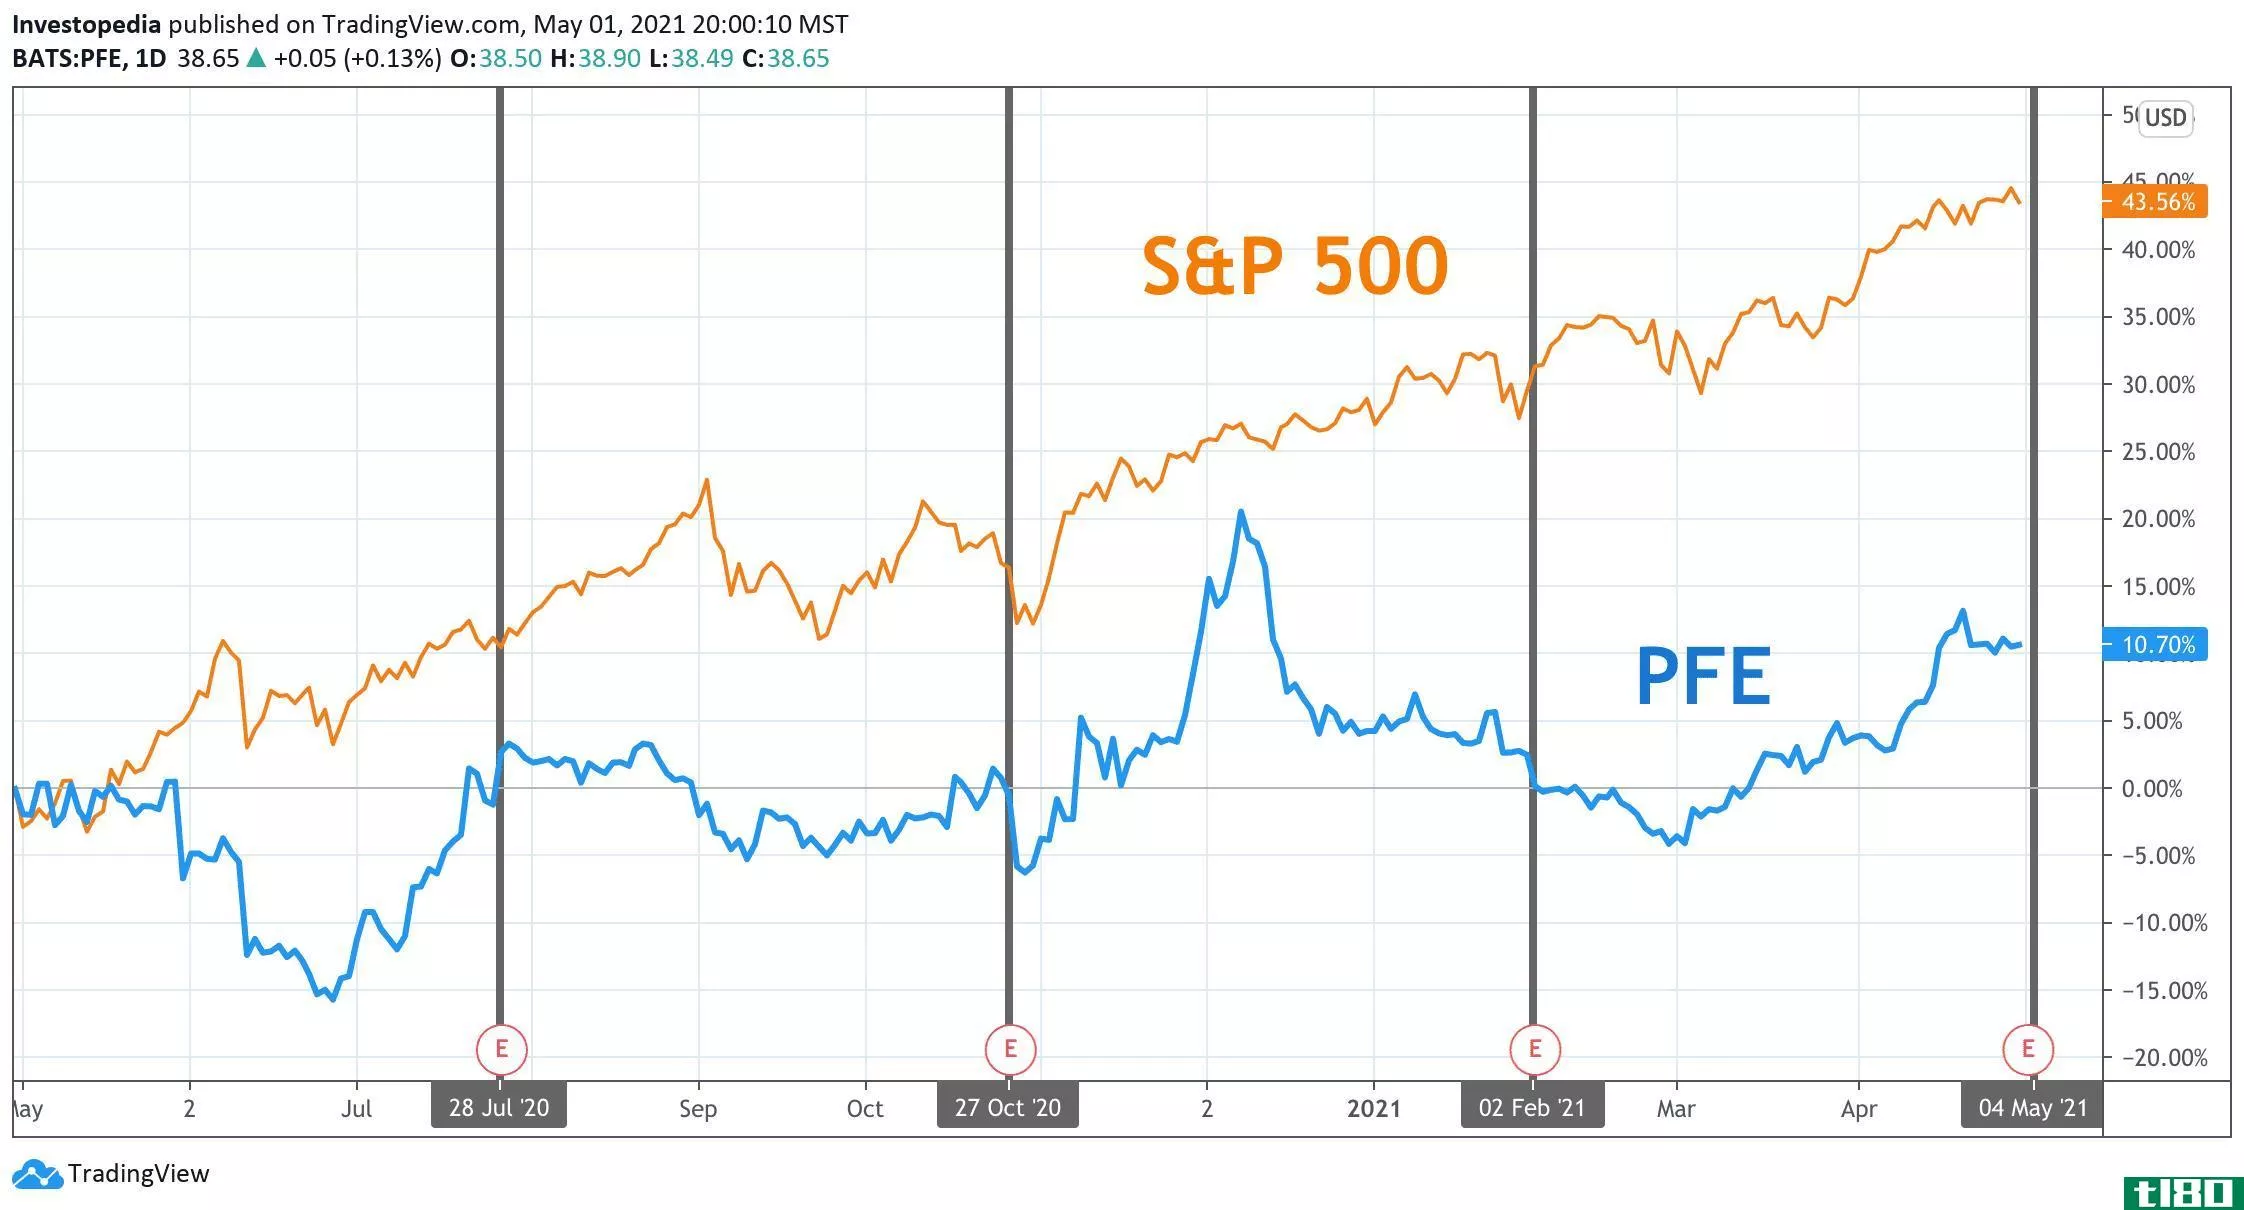 One Year Total Return for S&P 500 and Pfizer